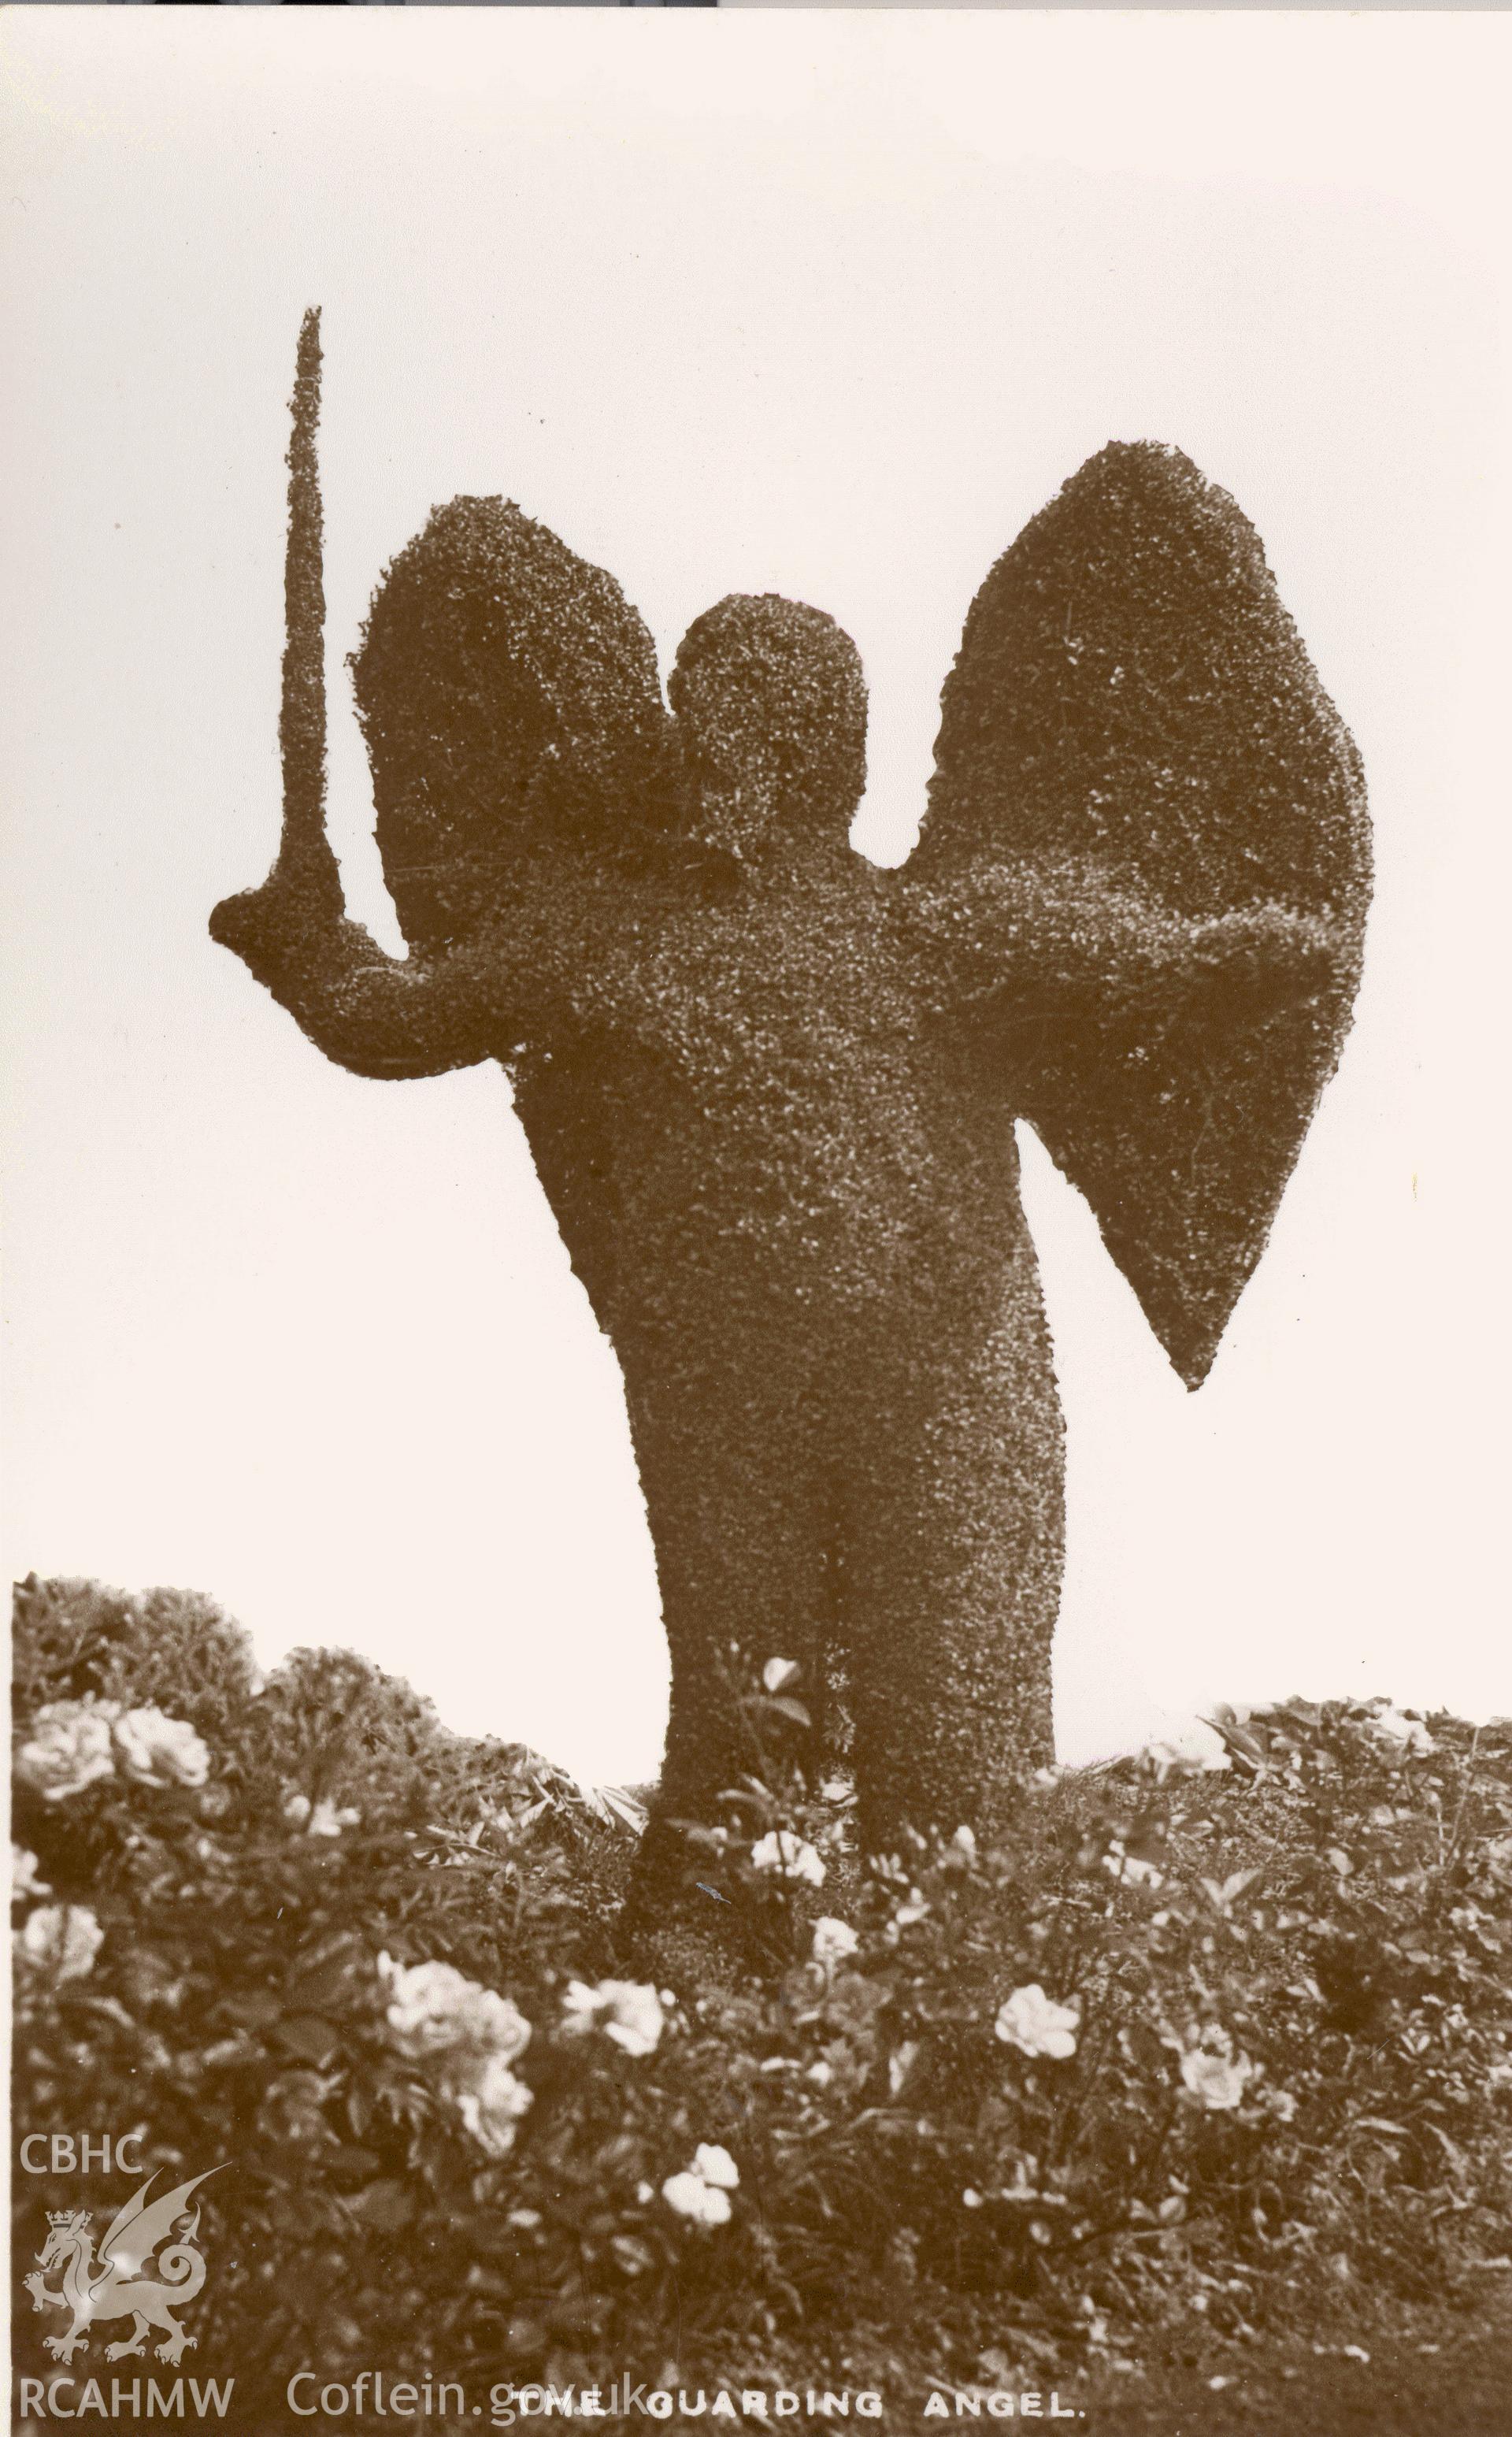 Digitised postcard image of topiary at Glynaur, Abergwili: 'the Guarding Angel', D. Davies, Glynaur, Abergwili. Produced by Parks and Gardens Data Services, from an original item in the Peter Davis Collection at Parks and Gardens UK. We hold only web-resolution images of this collection, suitable for viewing on screen and for research purposes only. We do not hold the original images, or publication quality scans.